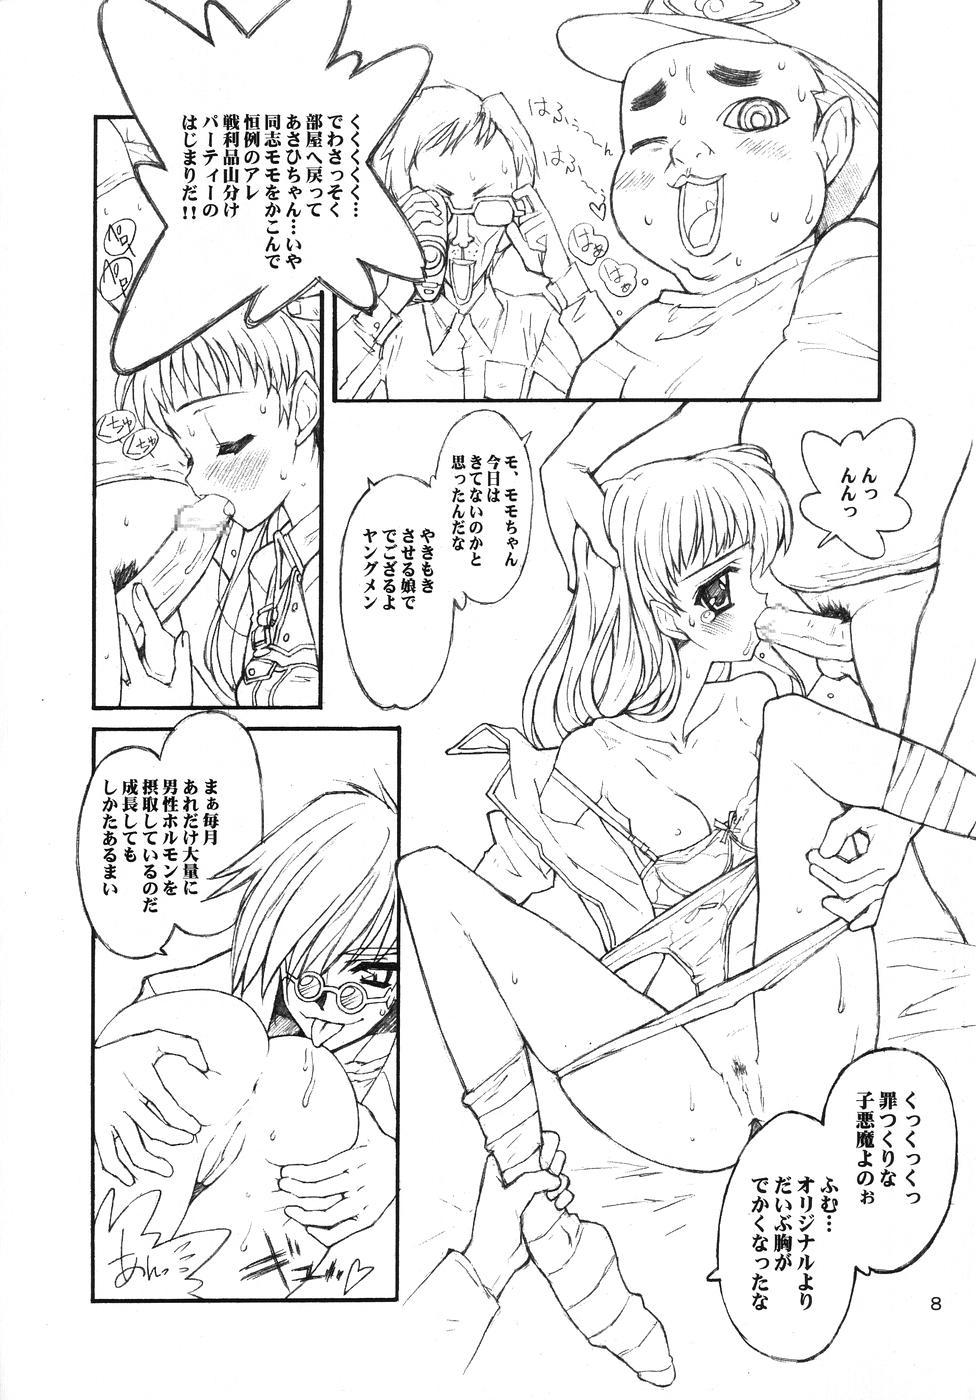 Blowjob Contest Mistress Emi-chan's Ambition - Comic party Culito - Page 7